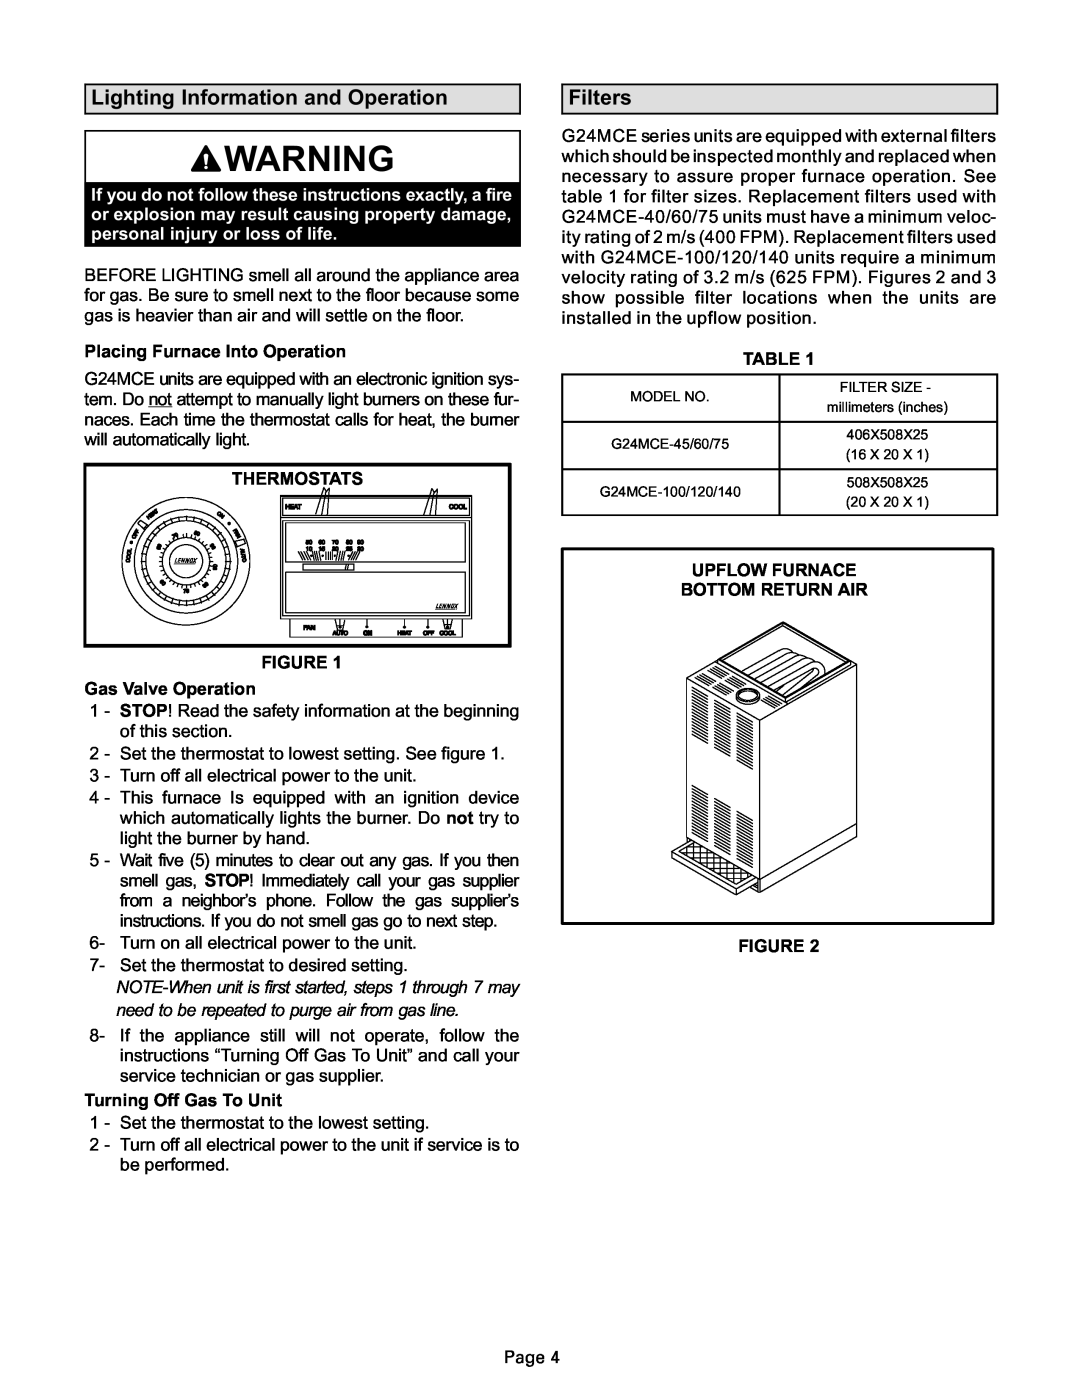 Lenoxx Electronics G24MCE manual Lighting Information and Operation, Filters 